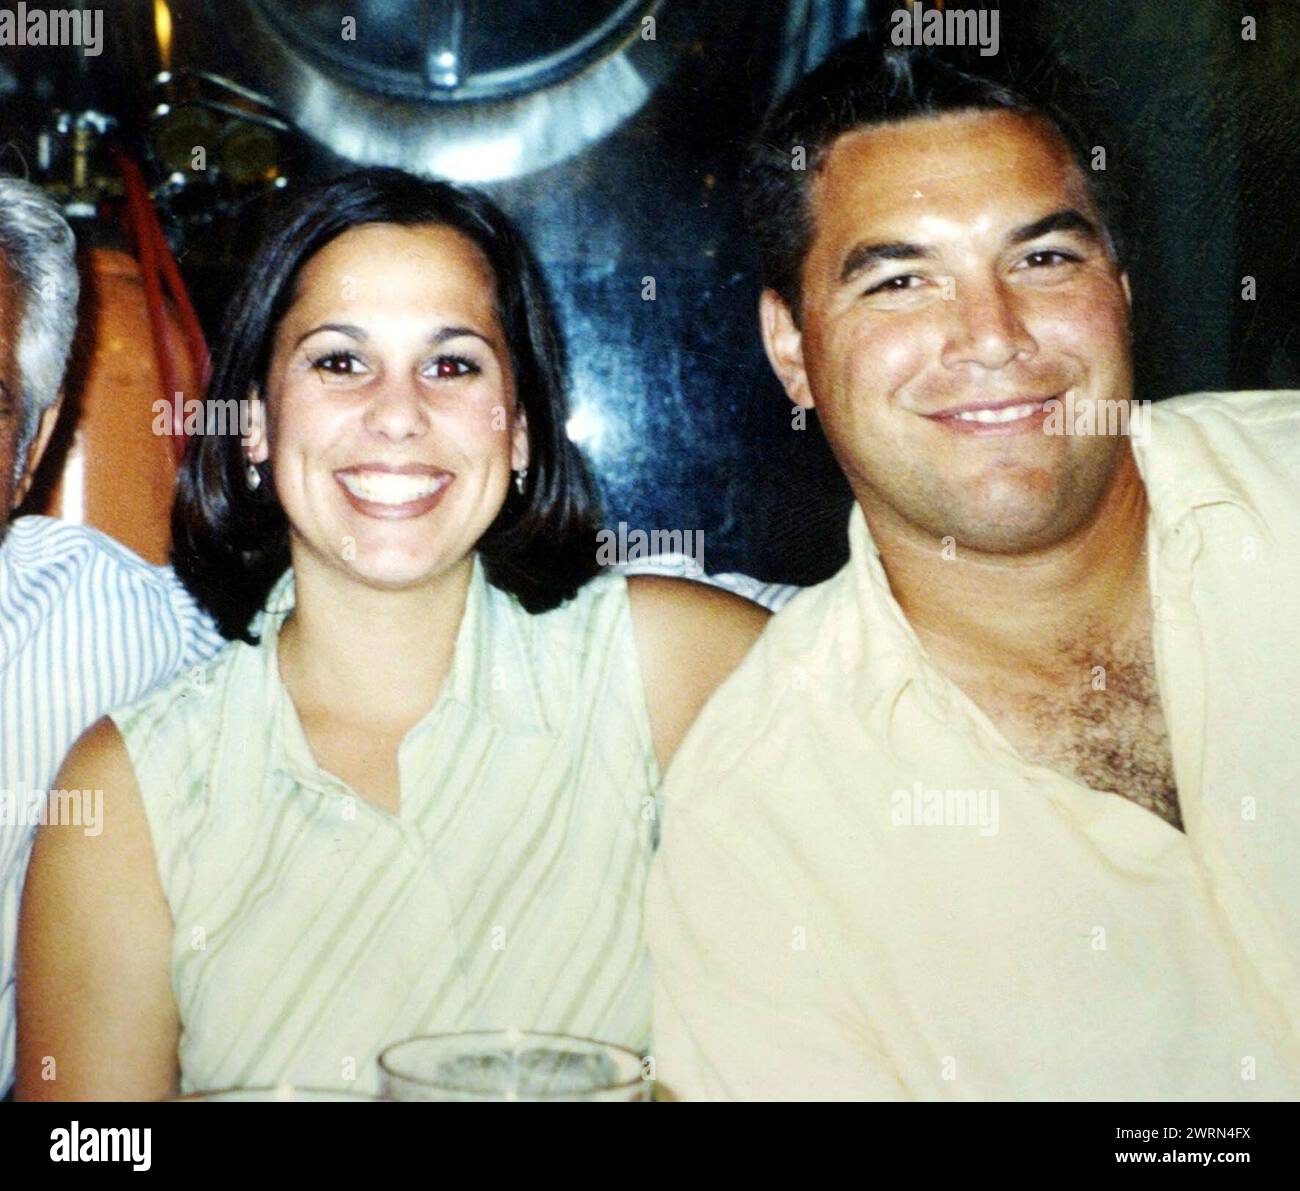 was declared GUILTY on two counts of murder Friday, November 12th, 2004. Pictured. 21st May, 2003. LACI PETERSON and SCOTT PETERSON shown in this undated picture. Scott was arrested in San Diego on Friday, April 18, 2003 in connection with the Christmas Eve disappearance of his pregnant wife, Laci Peterson. Credit: Modesto Police Department/ZUMAPRESS.com/Alamy Live News Stock Photo